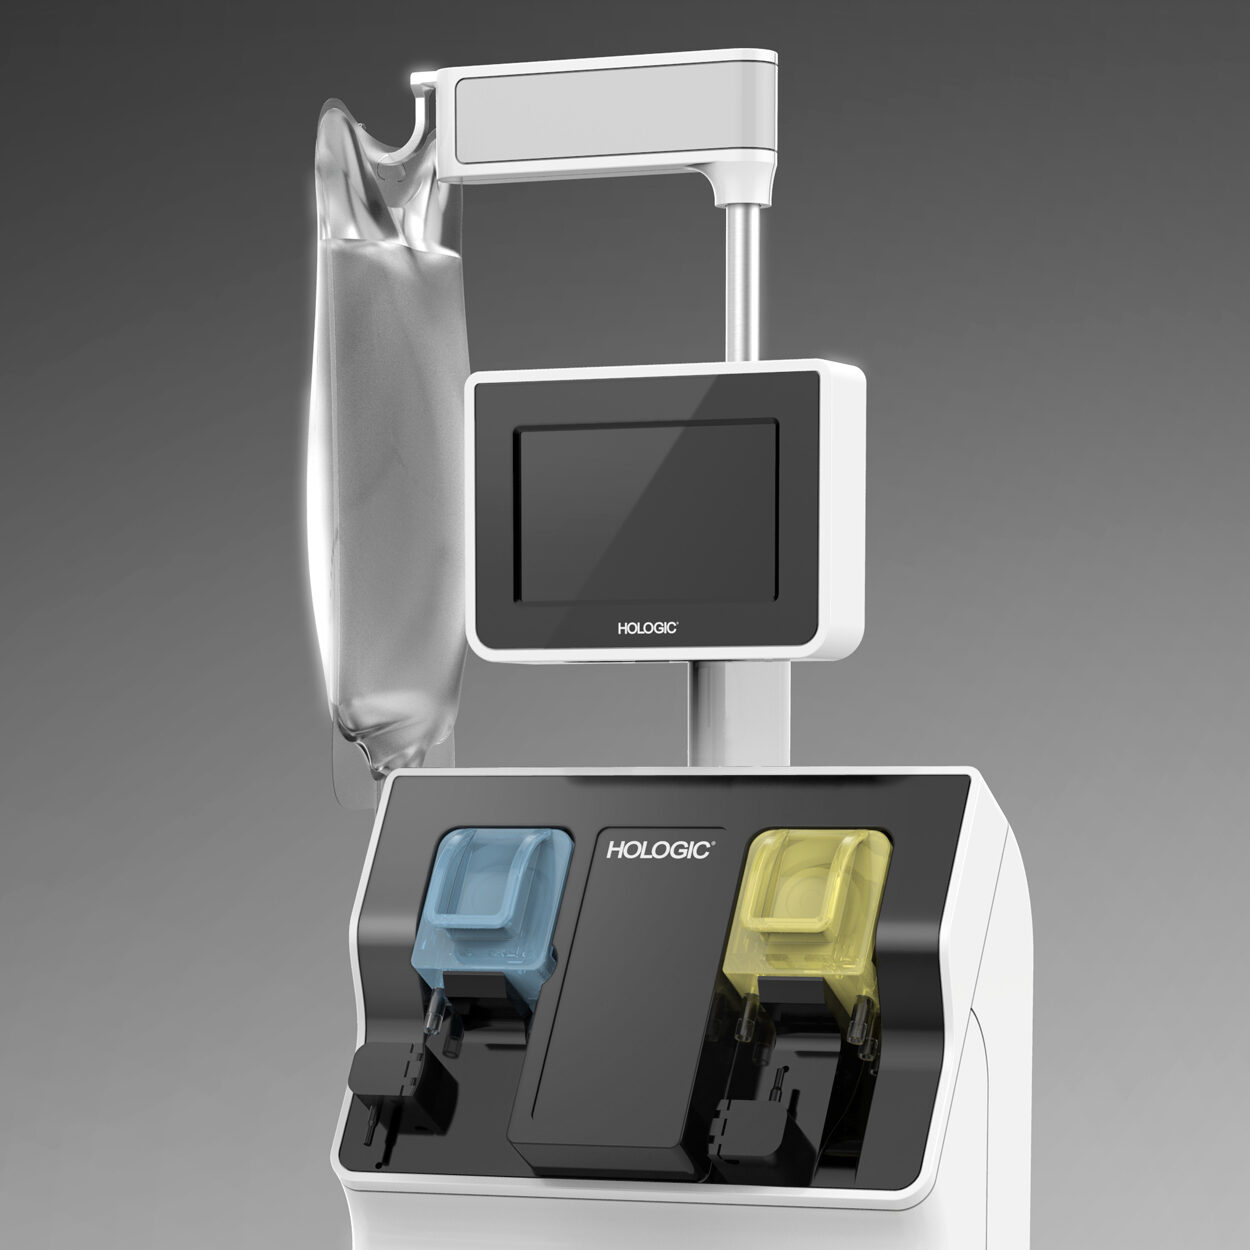 hologic fluid management system with display and controls